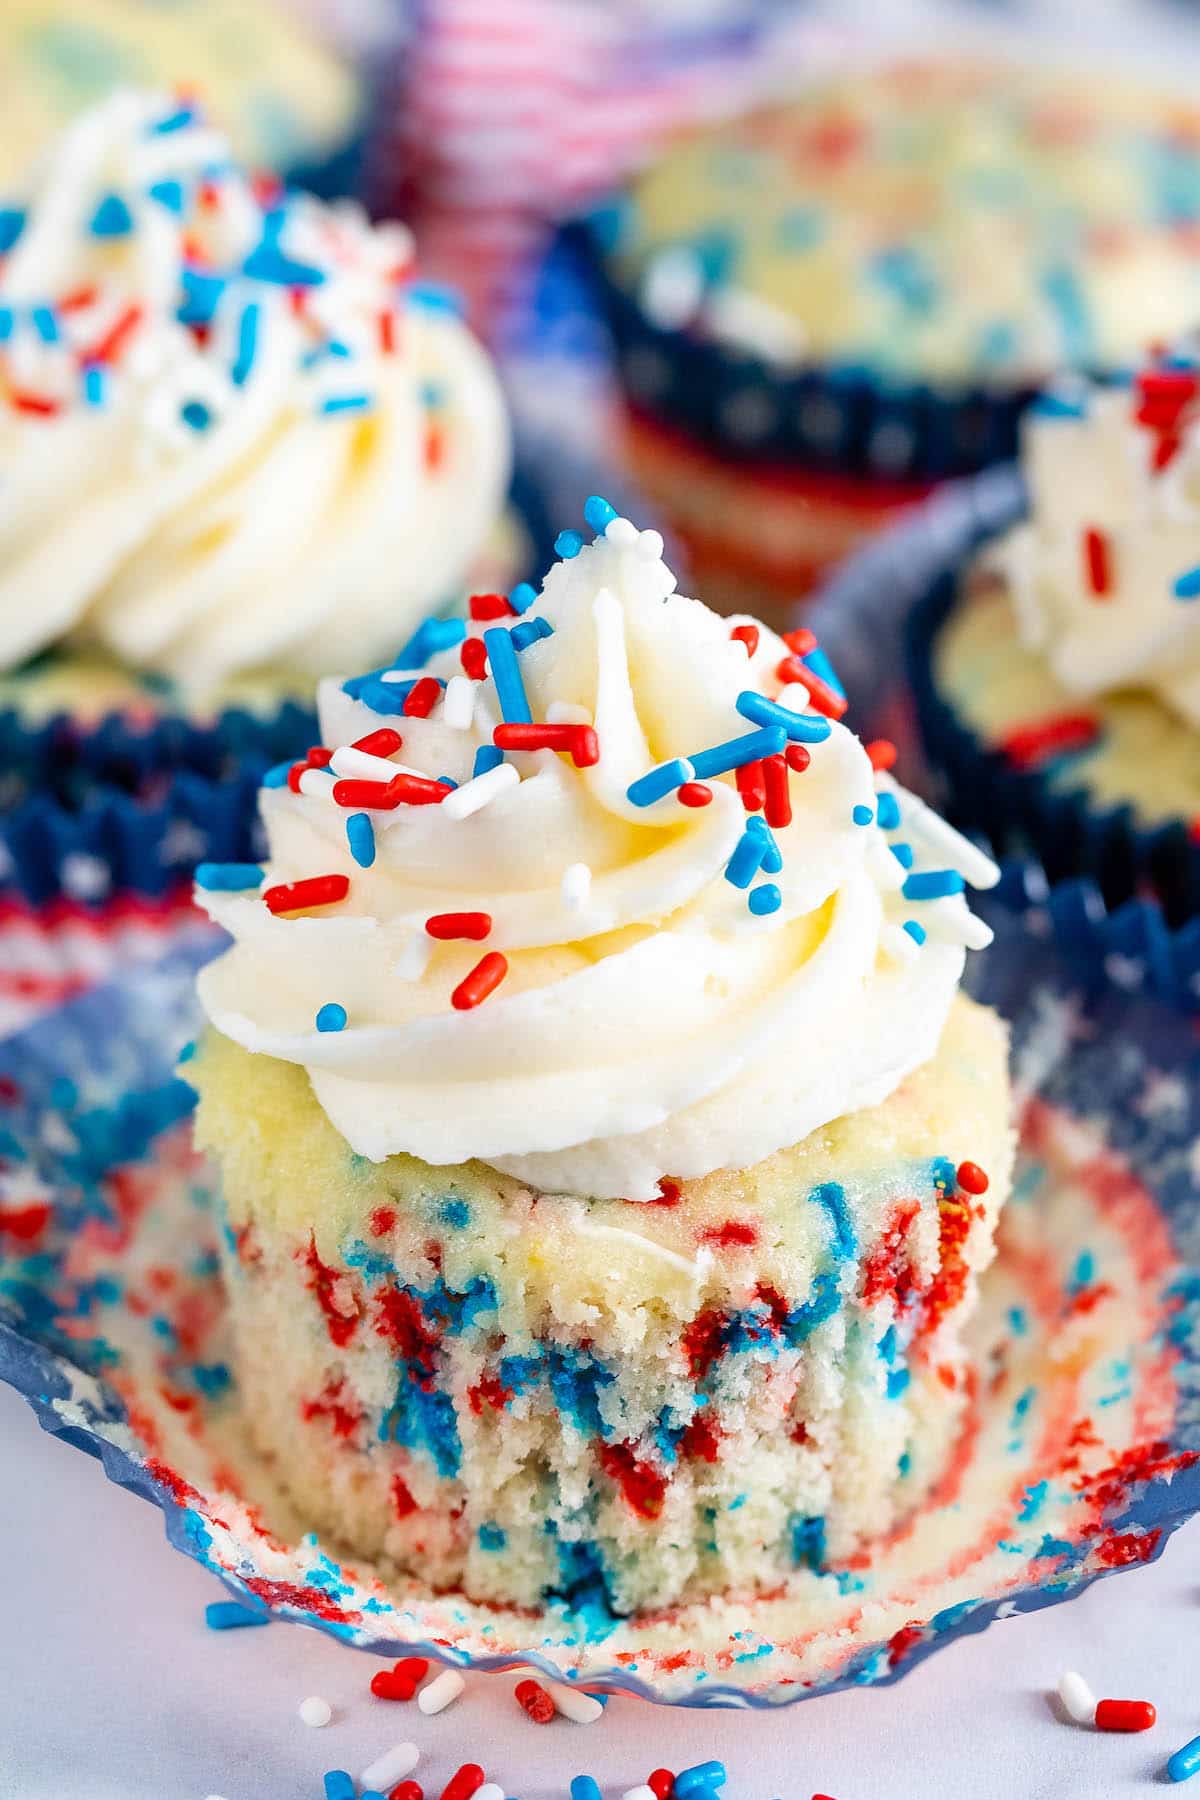 cupcakes with vanilla frosting and with red white and blue sprinkles on top.